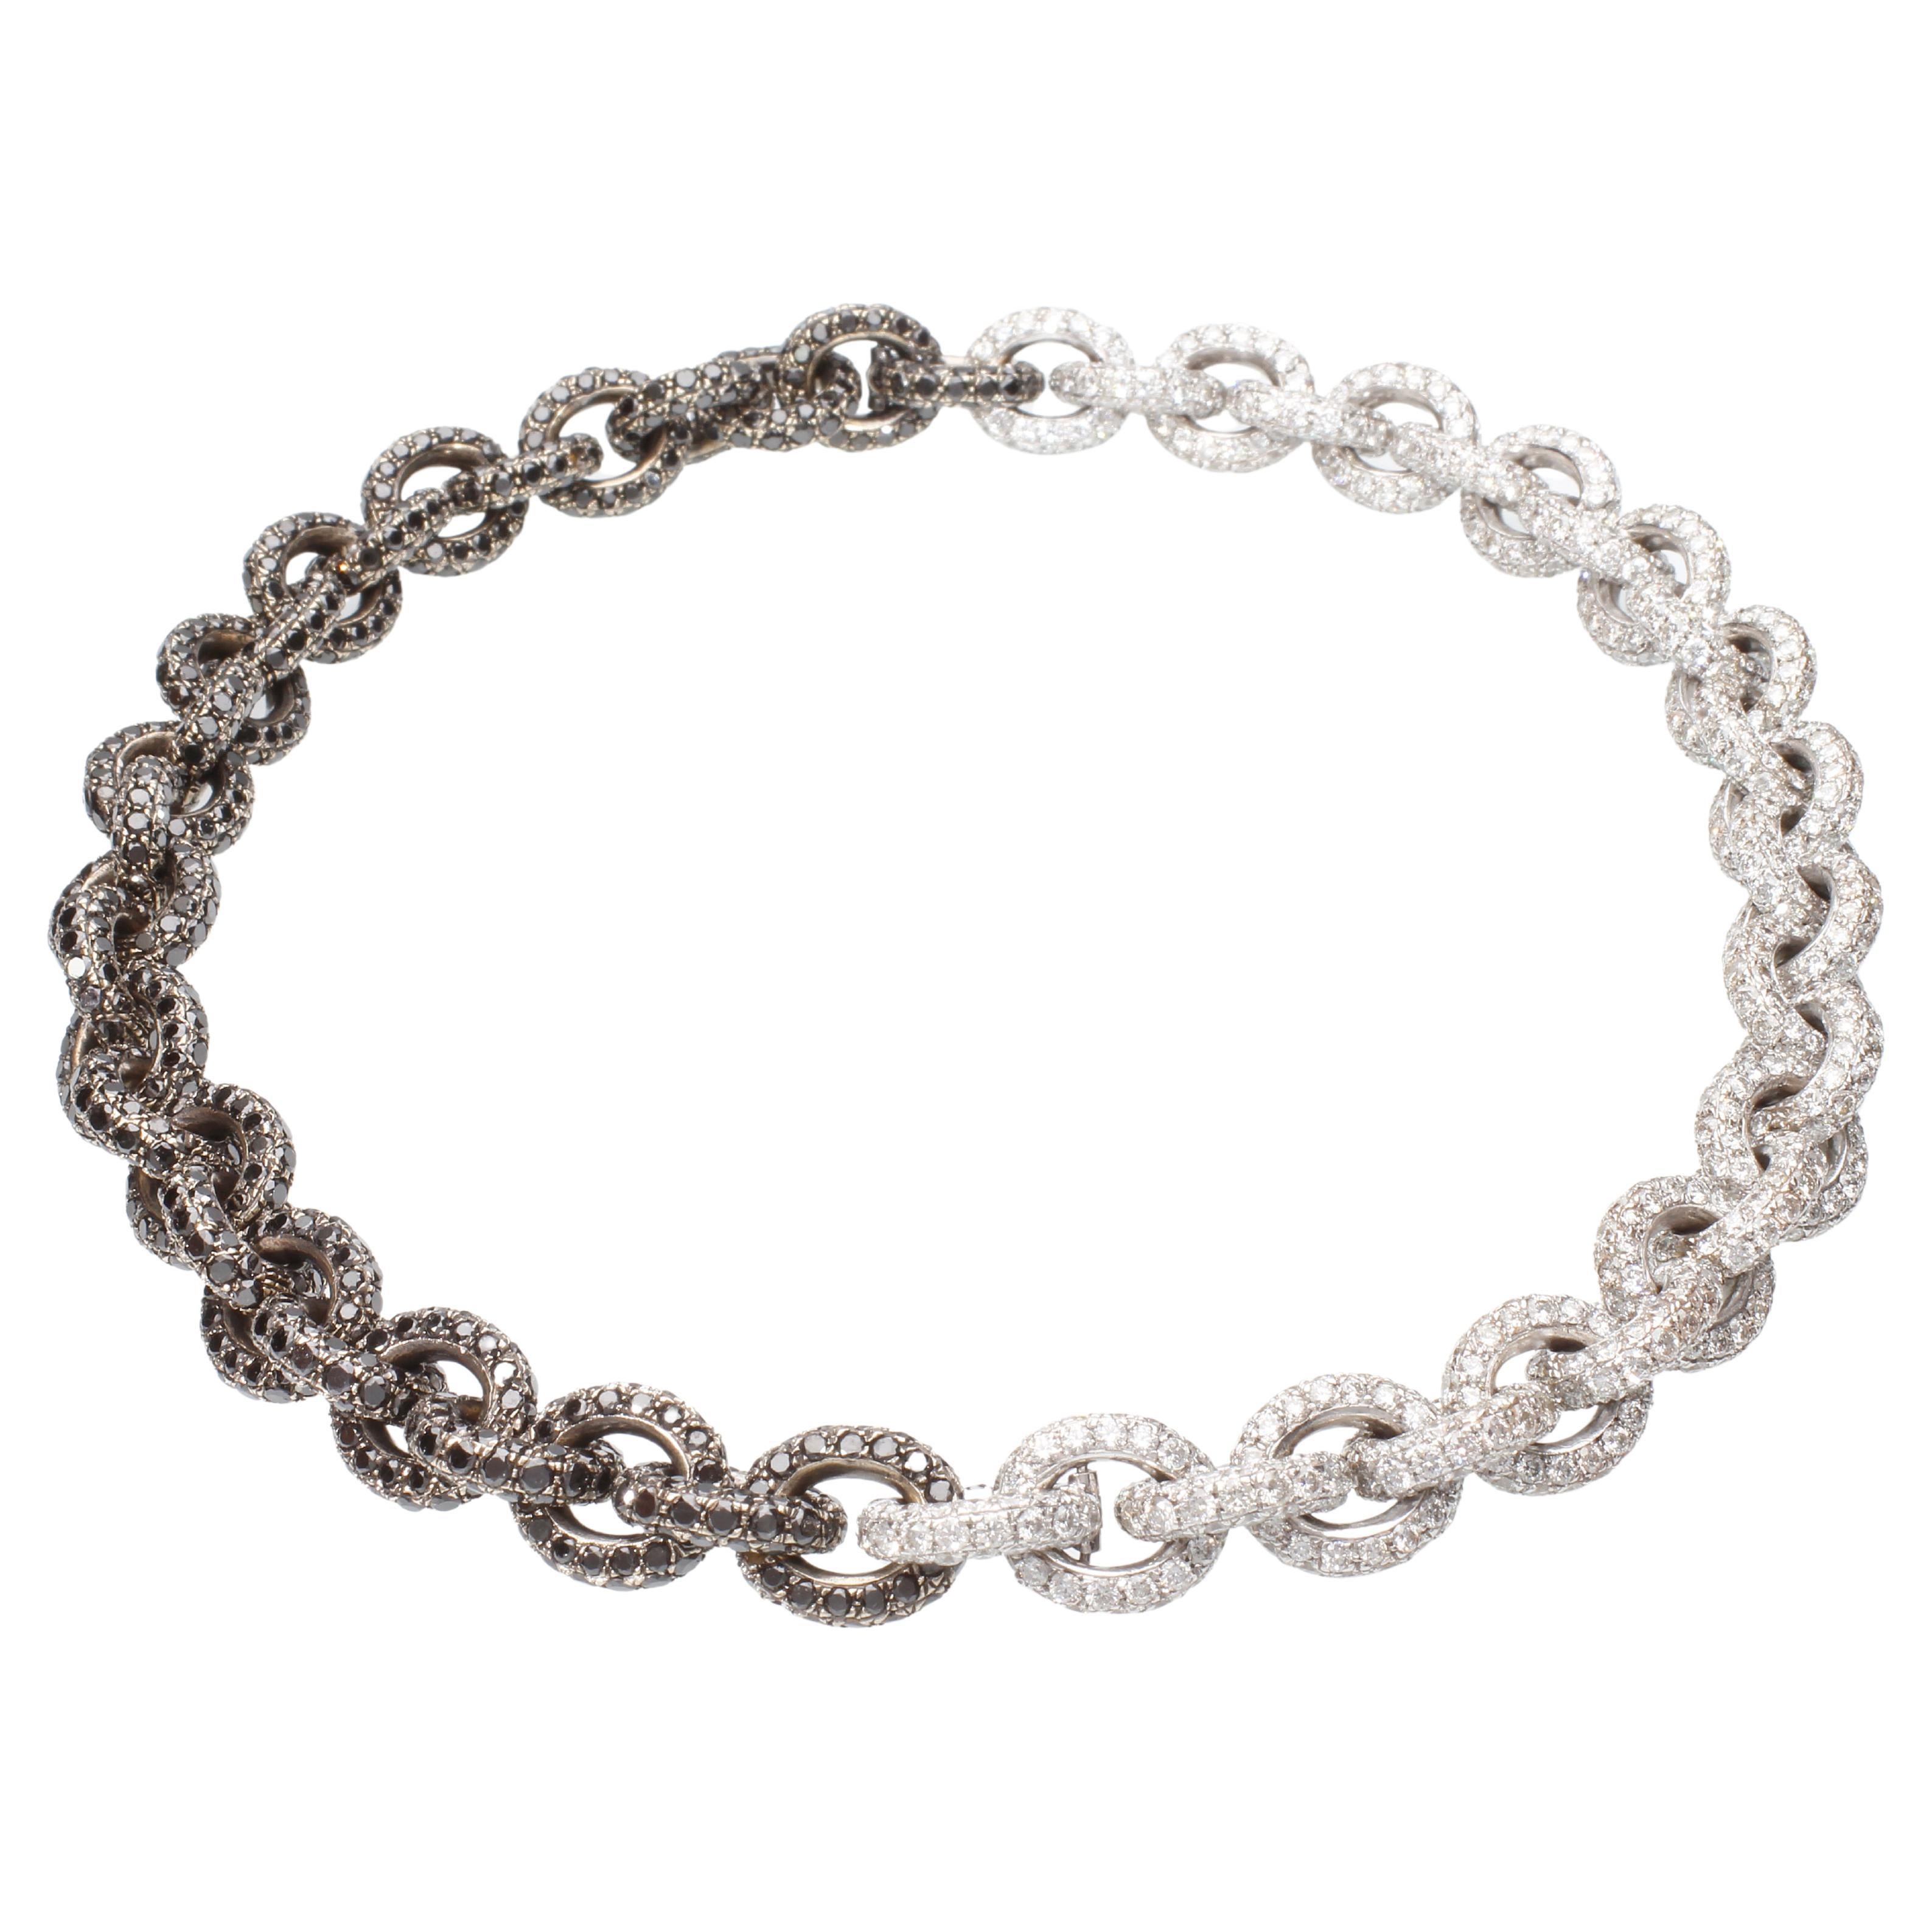 Chain Necklace/Bracelet with 64.26 Ct of White and Black Diamonds. Handmade. For Sale